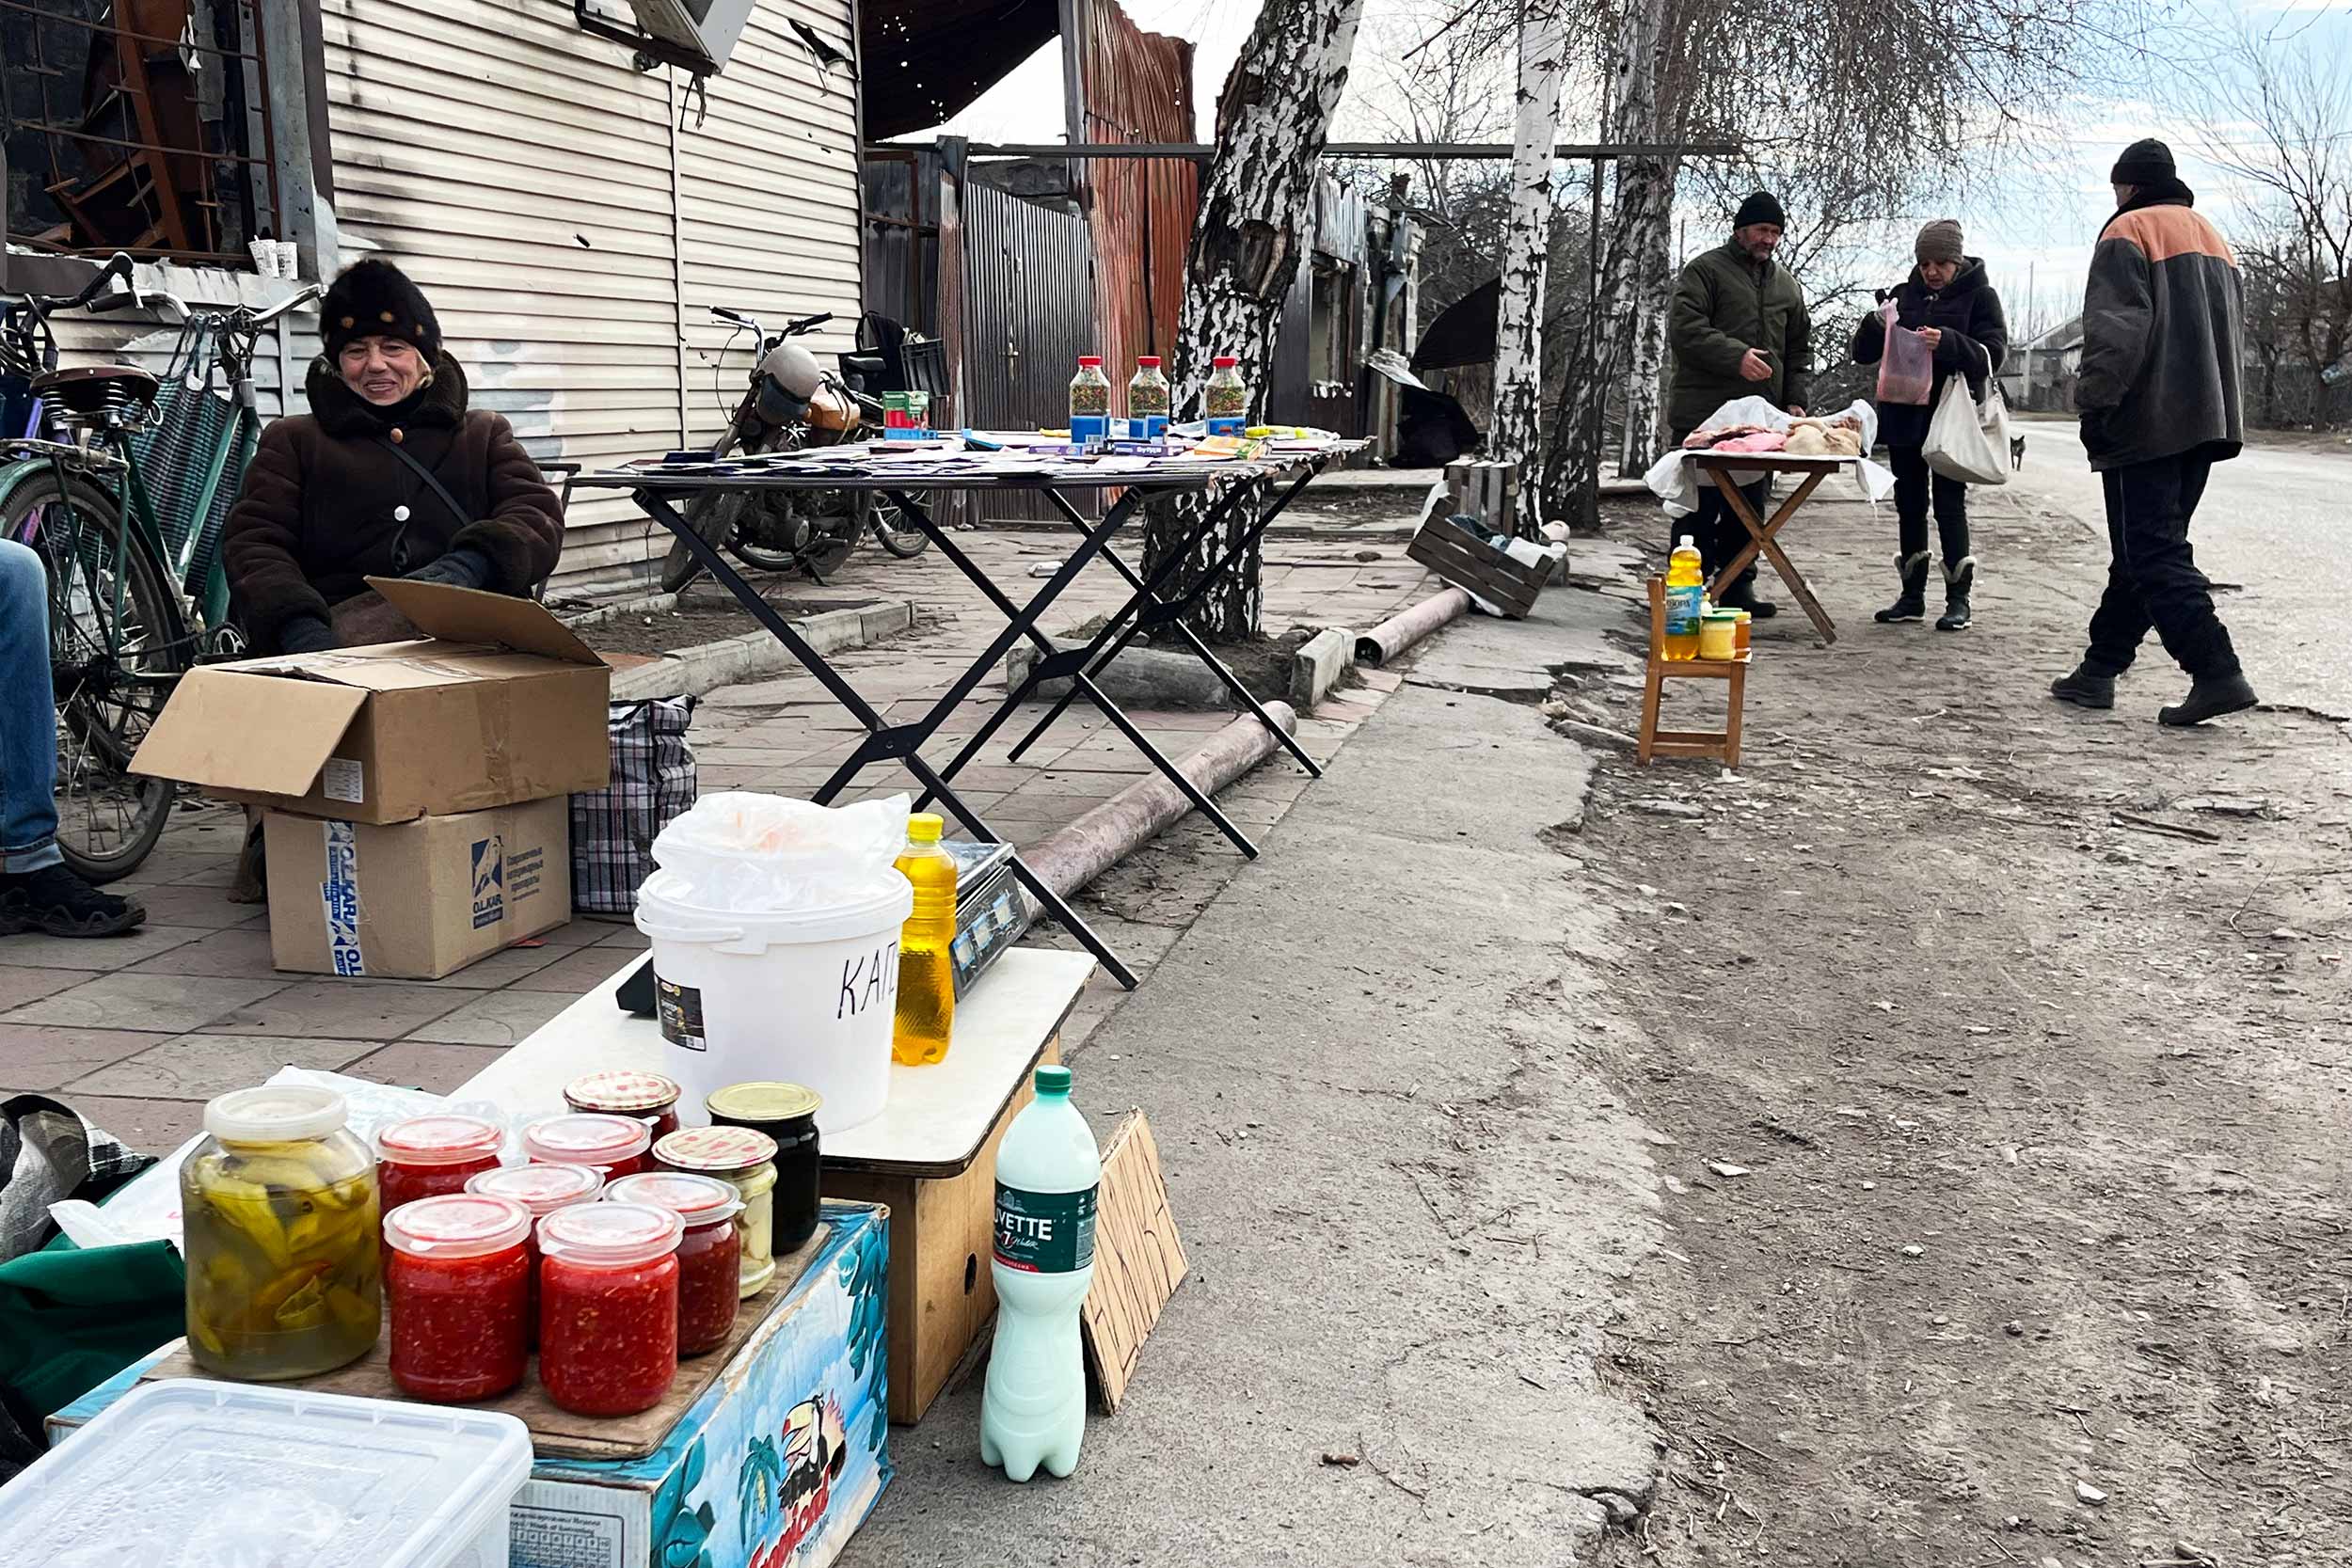 Residents sell small items on the street in Lyman, the frontline town in eastern Ukraine. Zinaida, 72, specialises in vegetable seeds, but says sales are not good because people fear there may be more shelling. © Anthony Borden